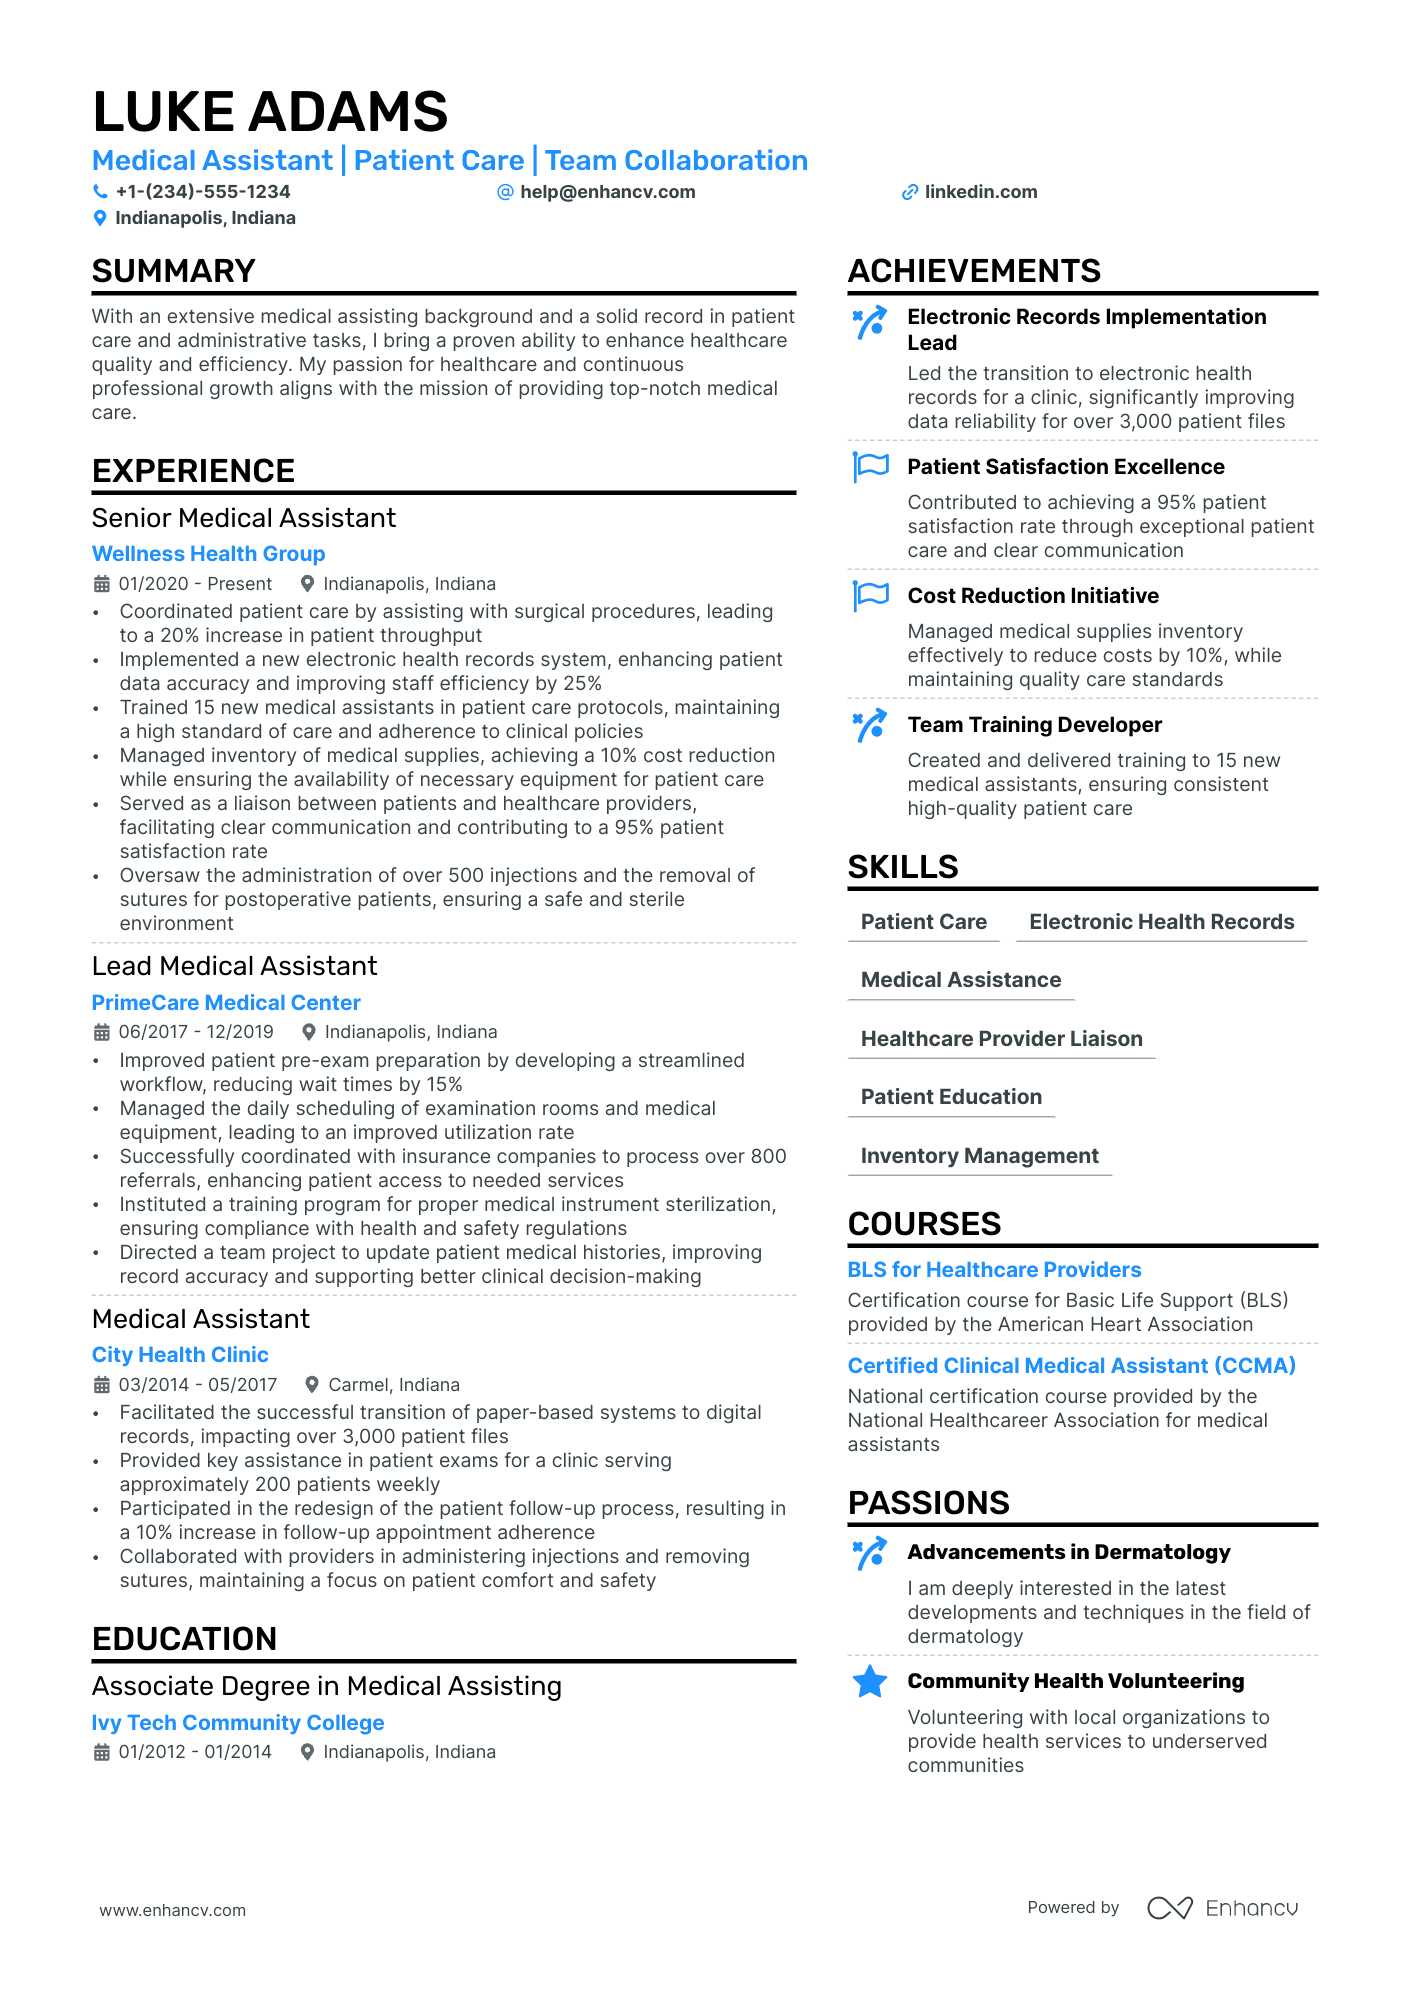 Dermatology Medical Assistant resume example